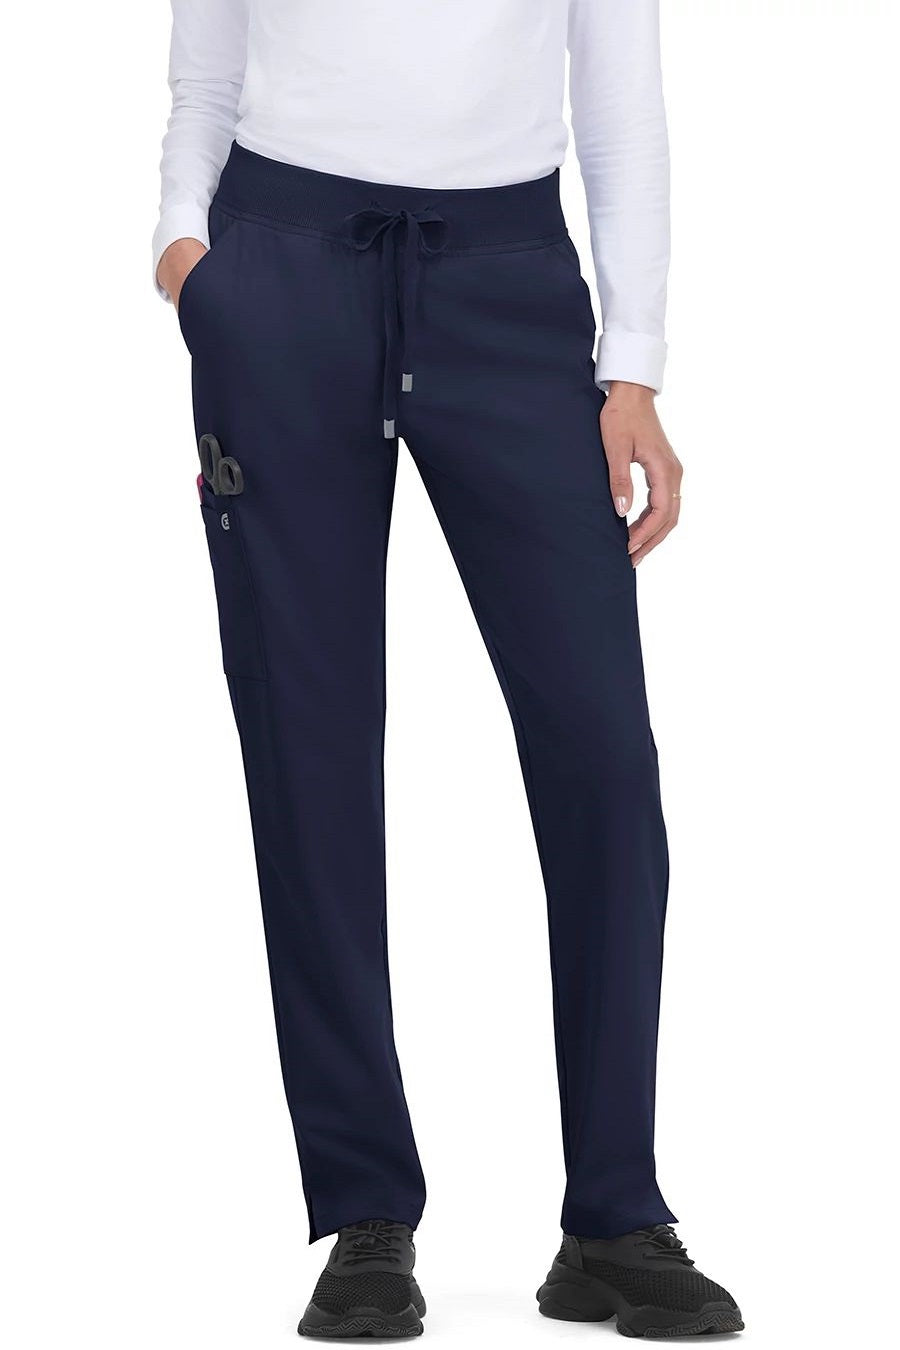 koi Scrub Pants Cureology Atria in Tall Navy at Parker's Clothing and Shoes.